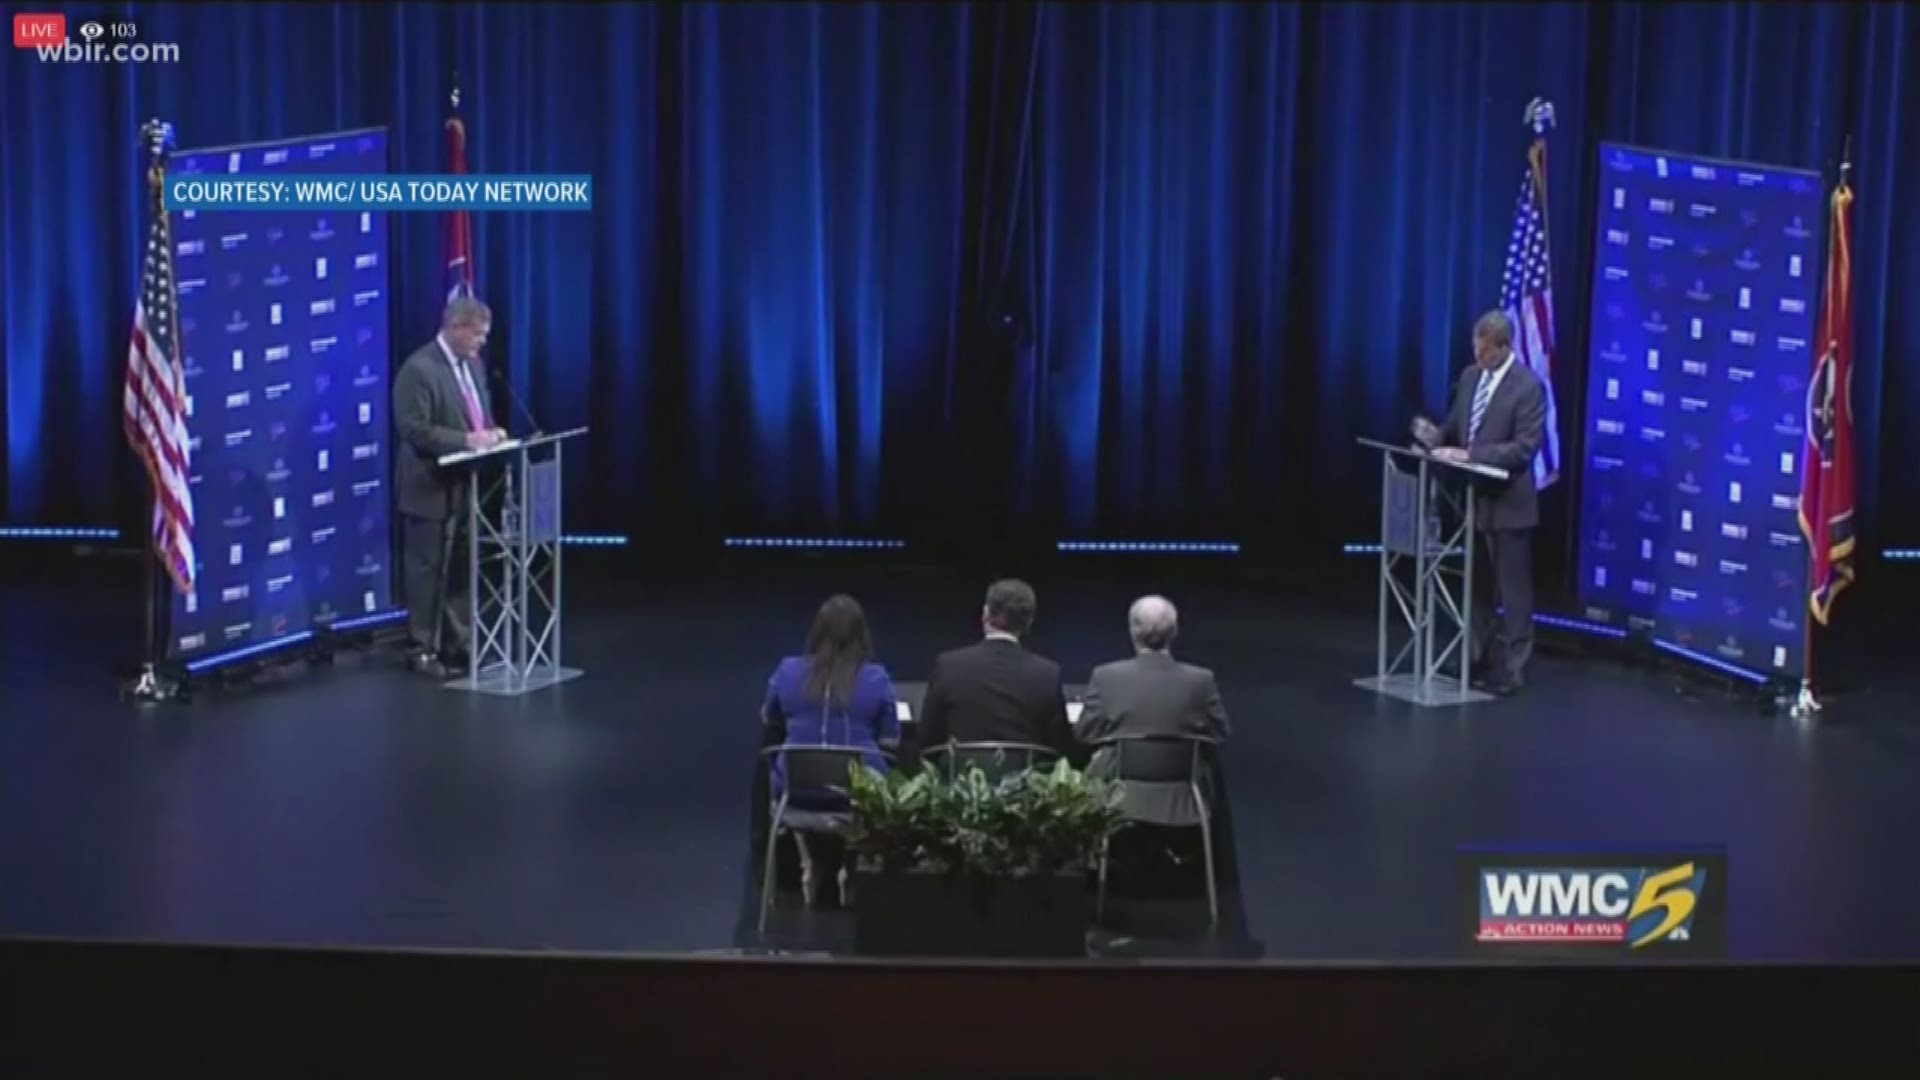 The two candidates vying to be Tennessee's next governor took part in their first debate in Memphis.